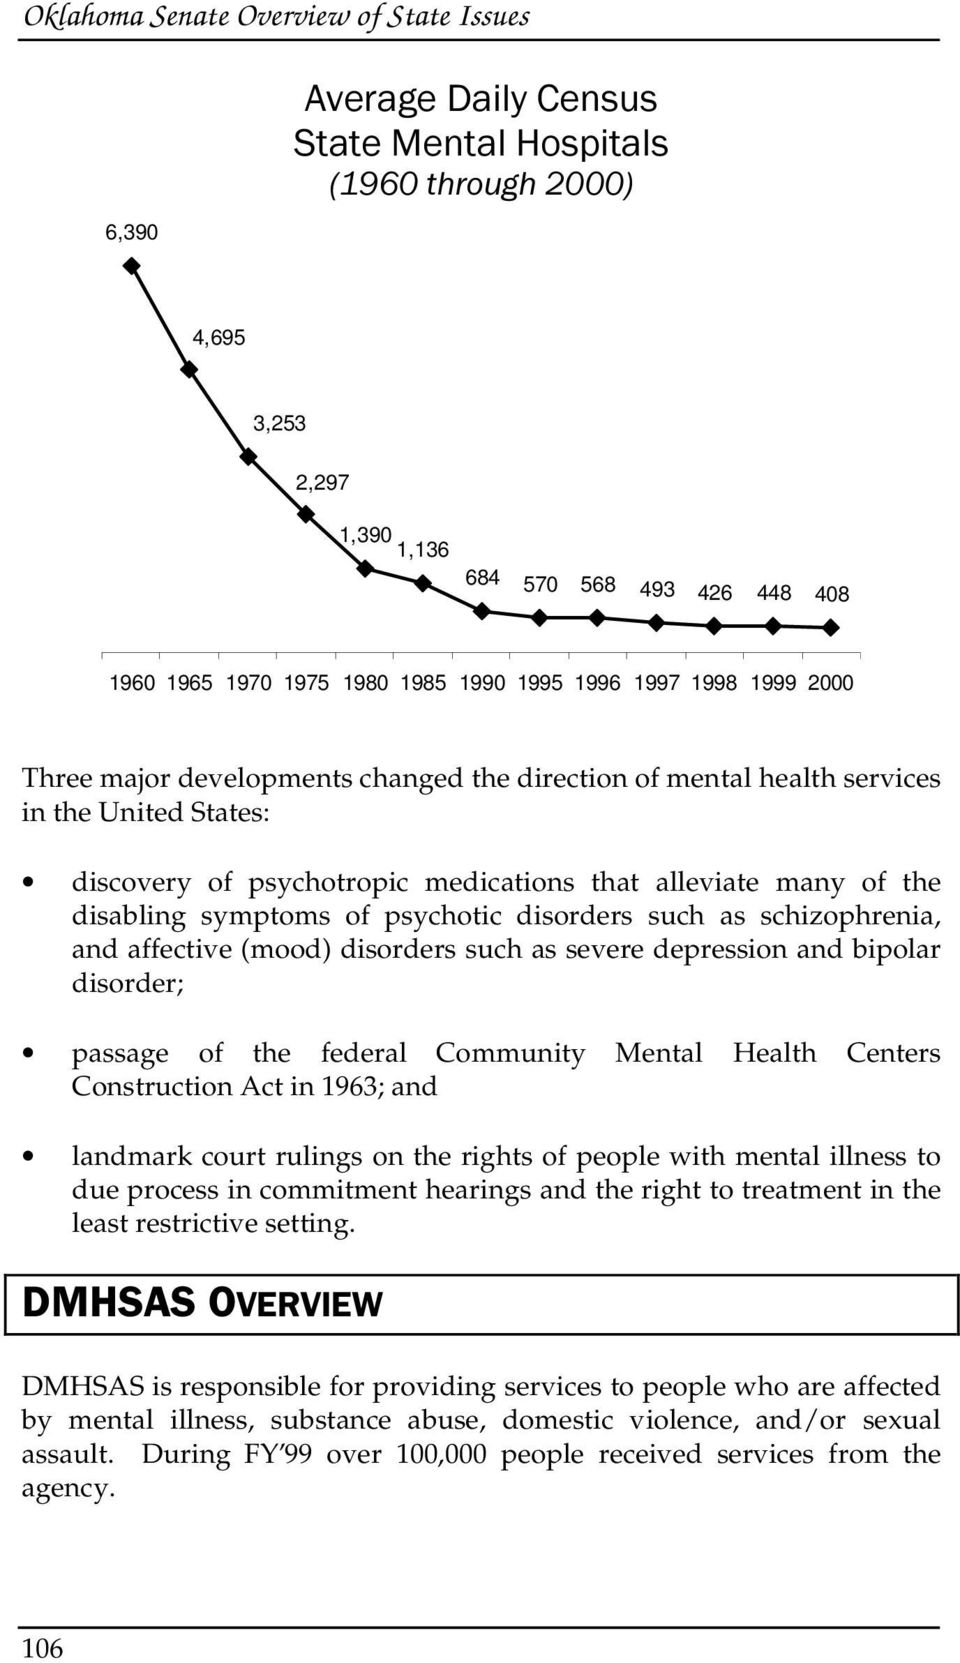 schizophrenia, and affective (mood) disorders such as severe depression and bipolar disorder; passage of the federal Community Mental Health Centers Construction Act in 1963; and landmark court